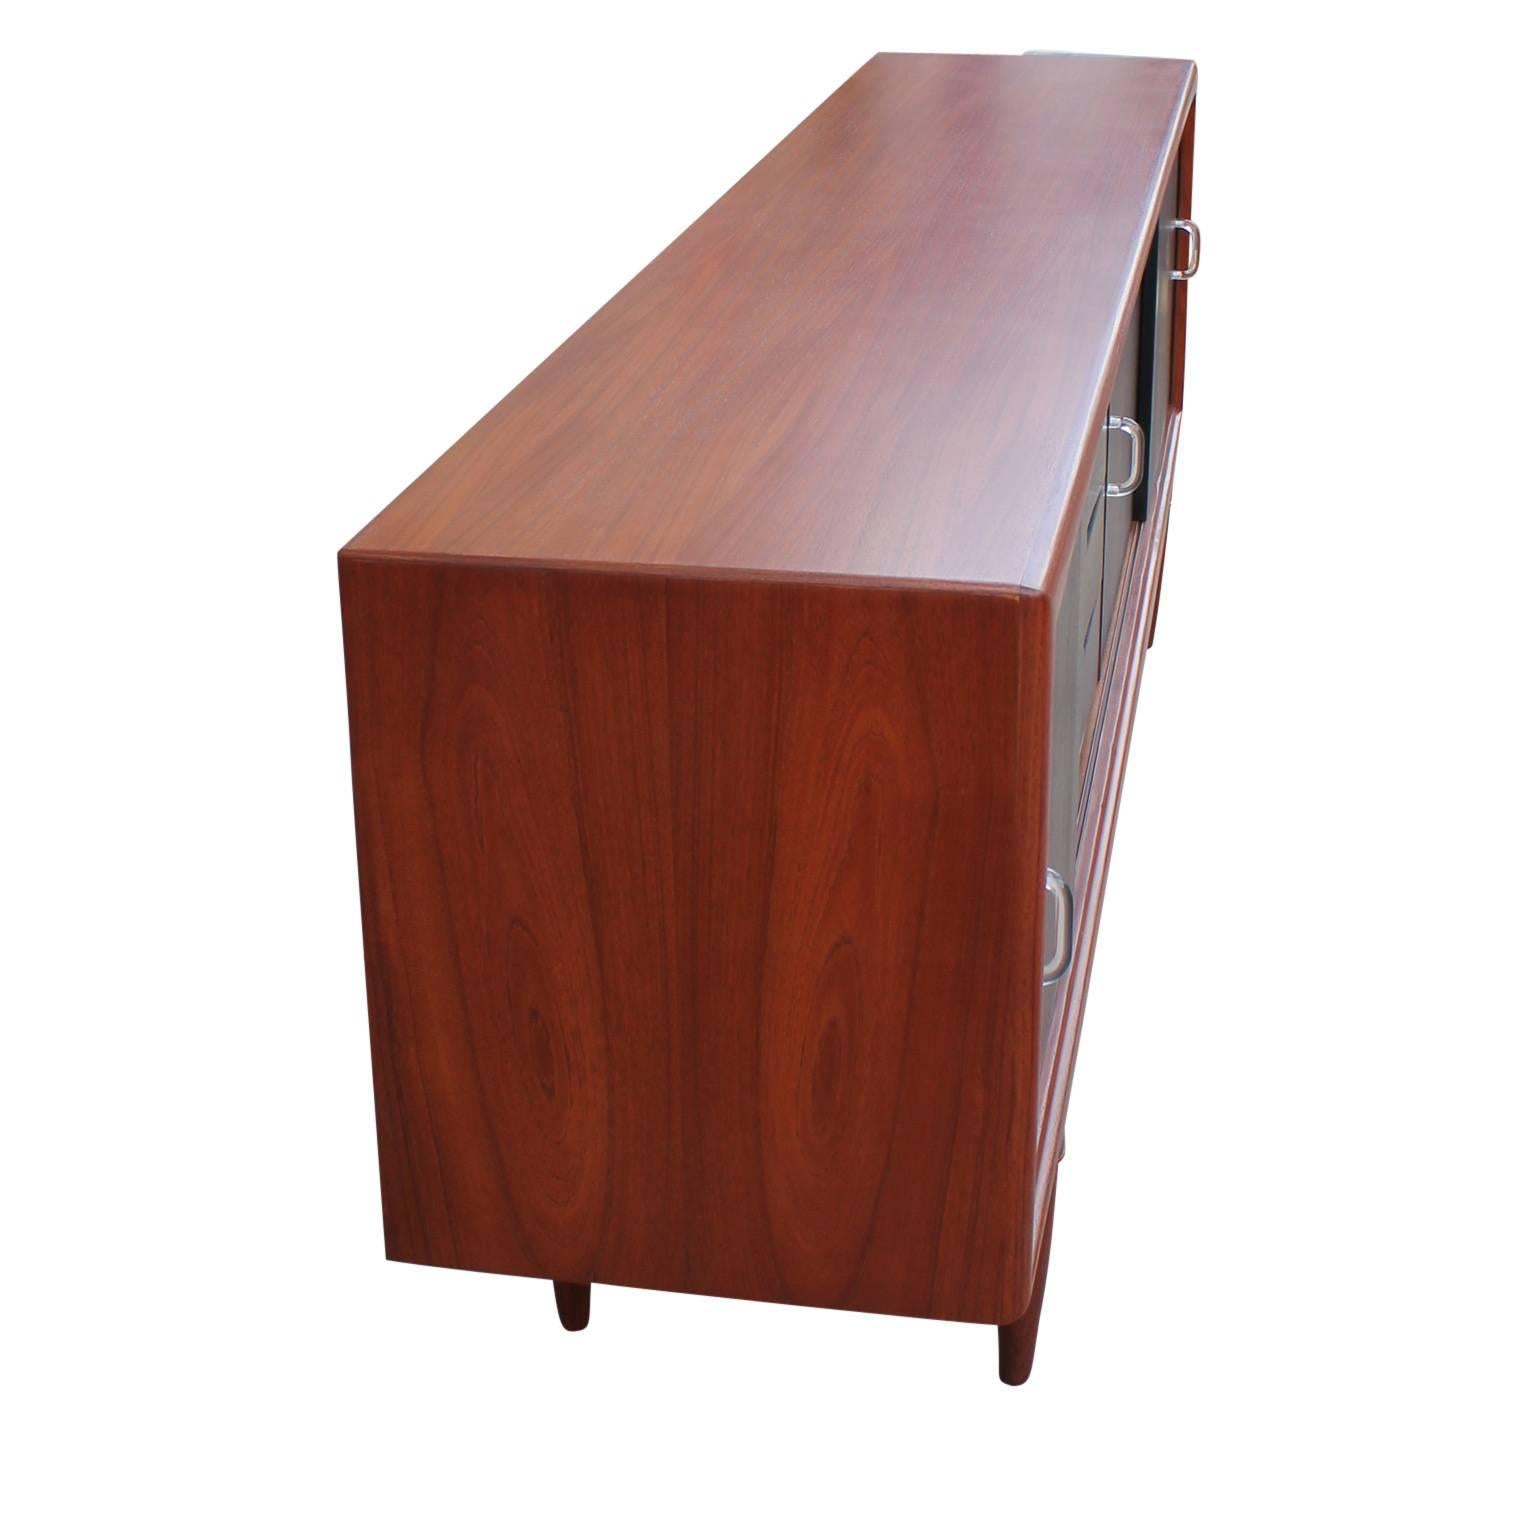 Mid-20th Century Two-Tone Modern Danish Credenza or Sideboard Lucite Handles